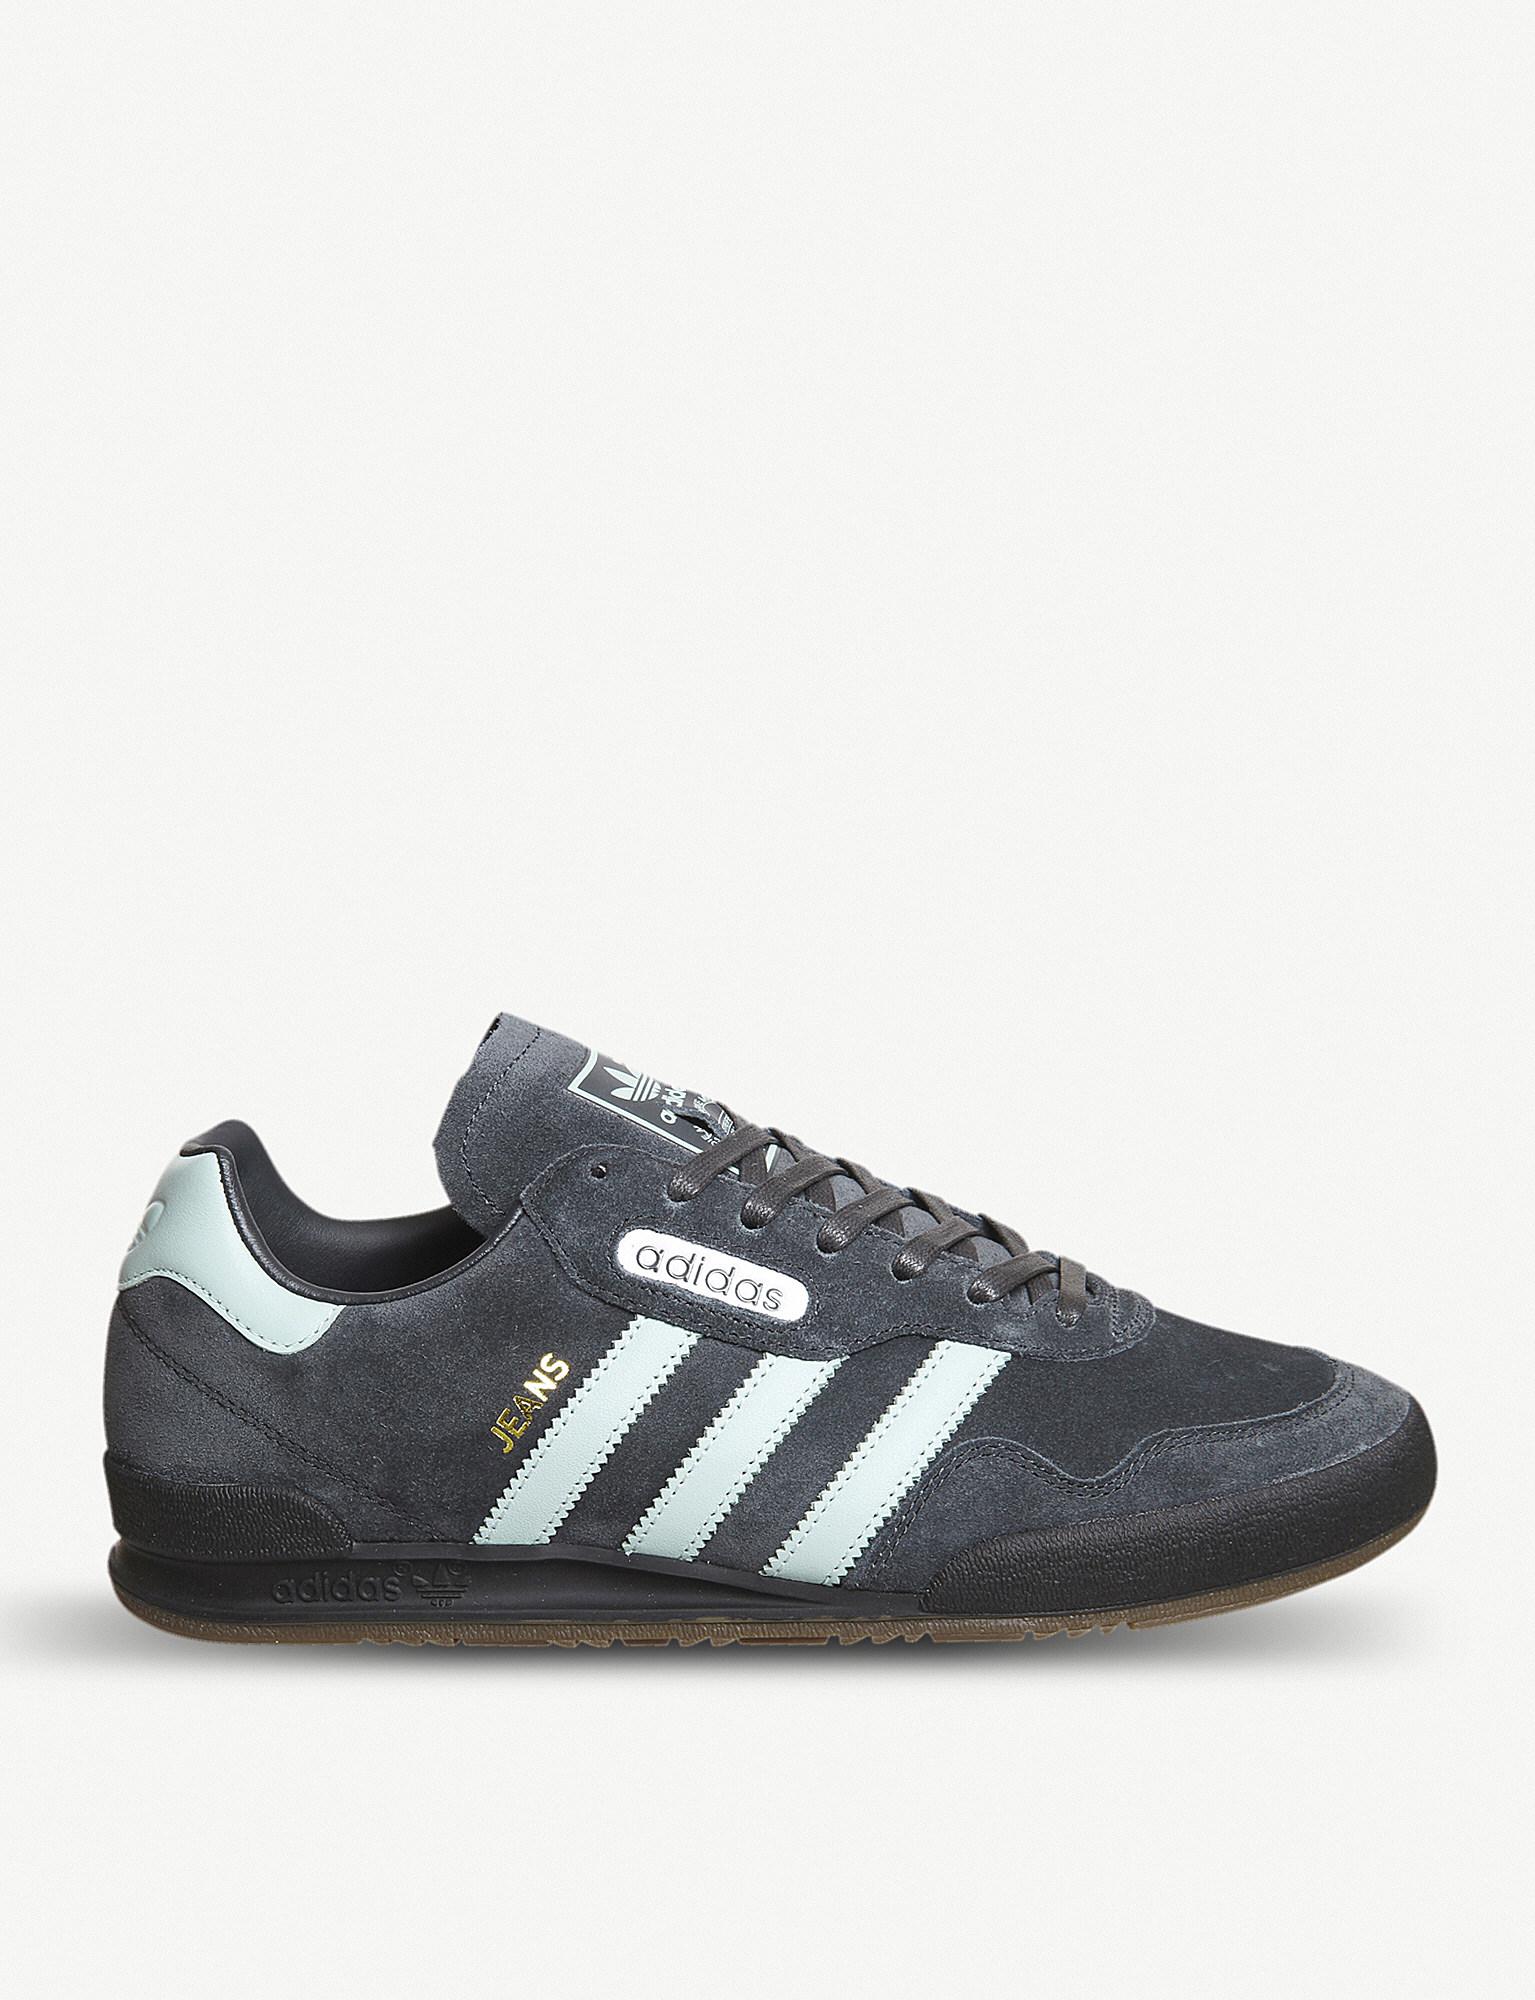 adidas jeans grey trainers